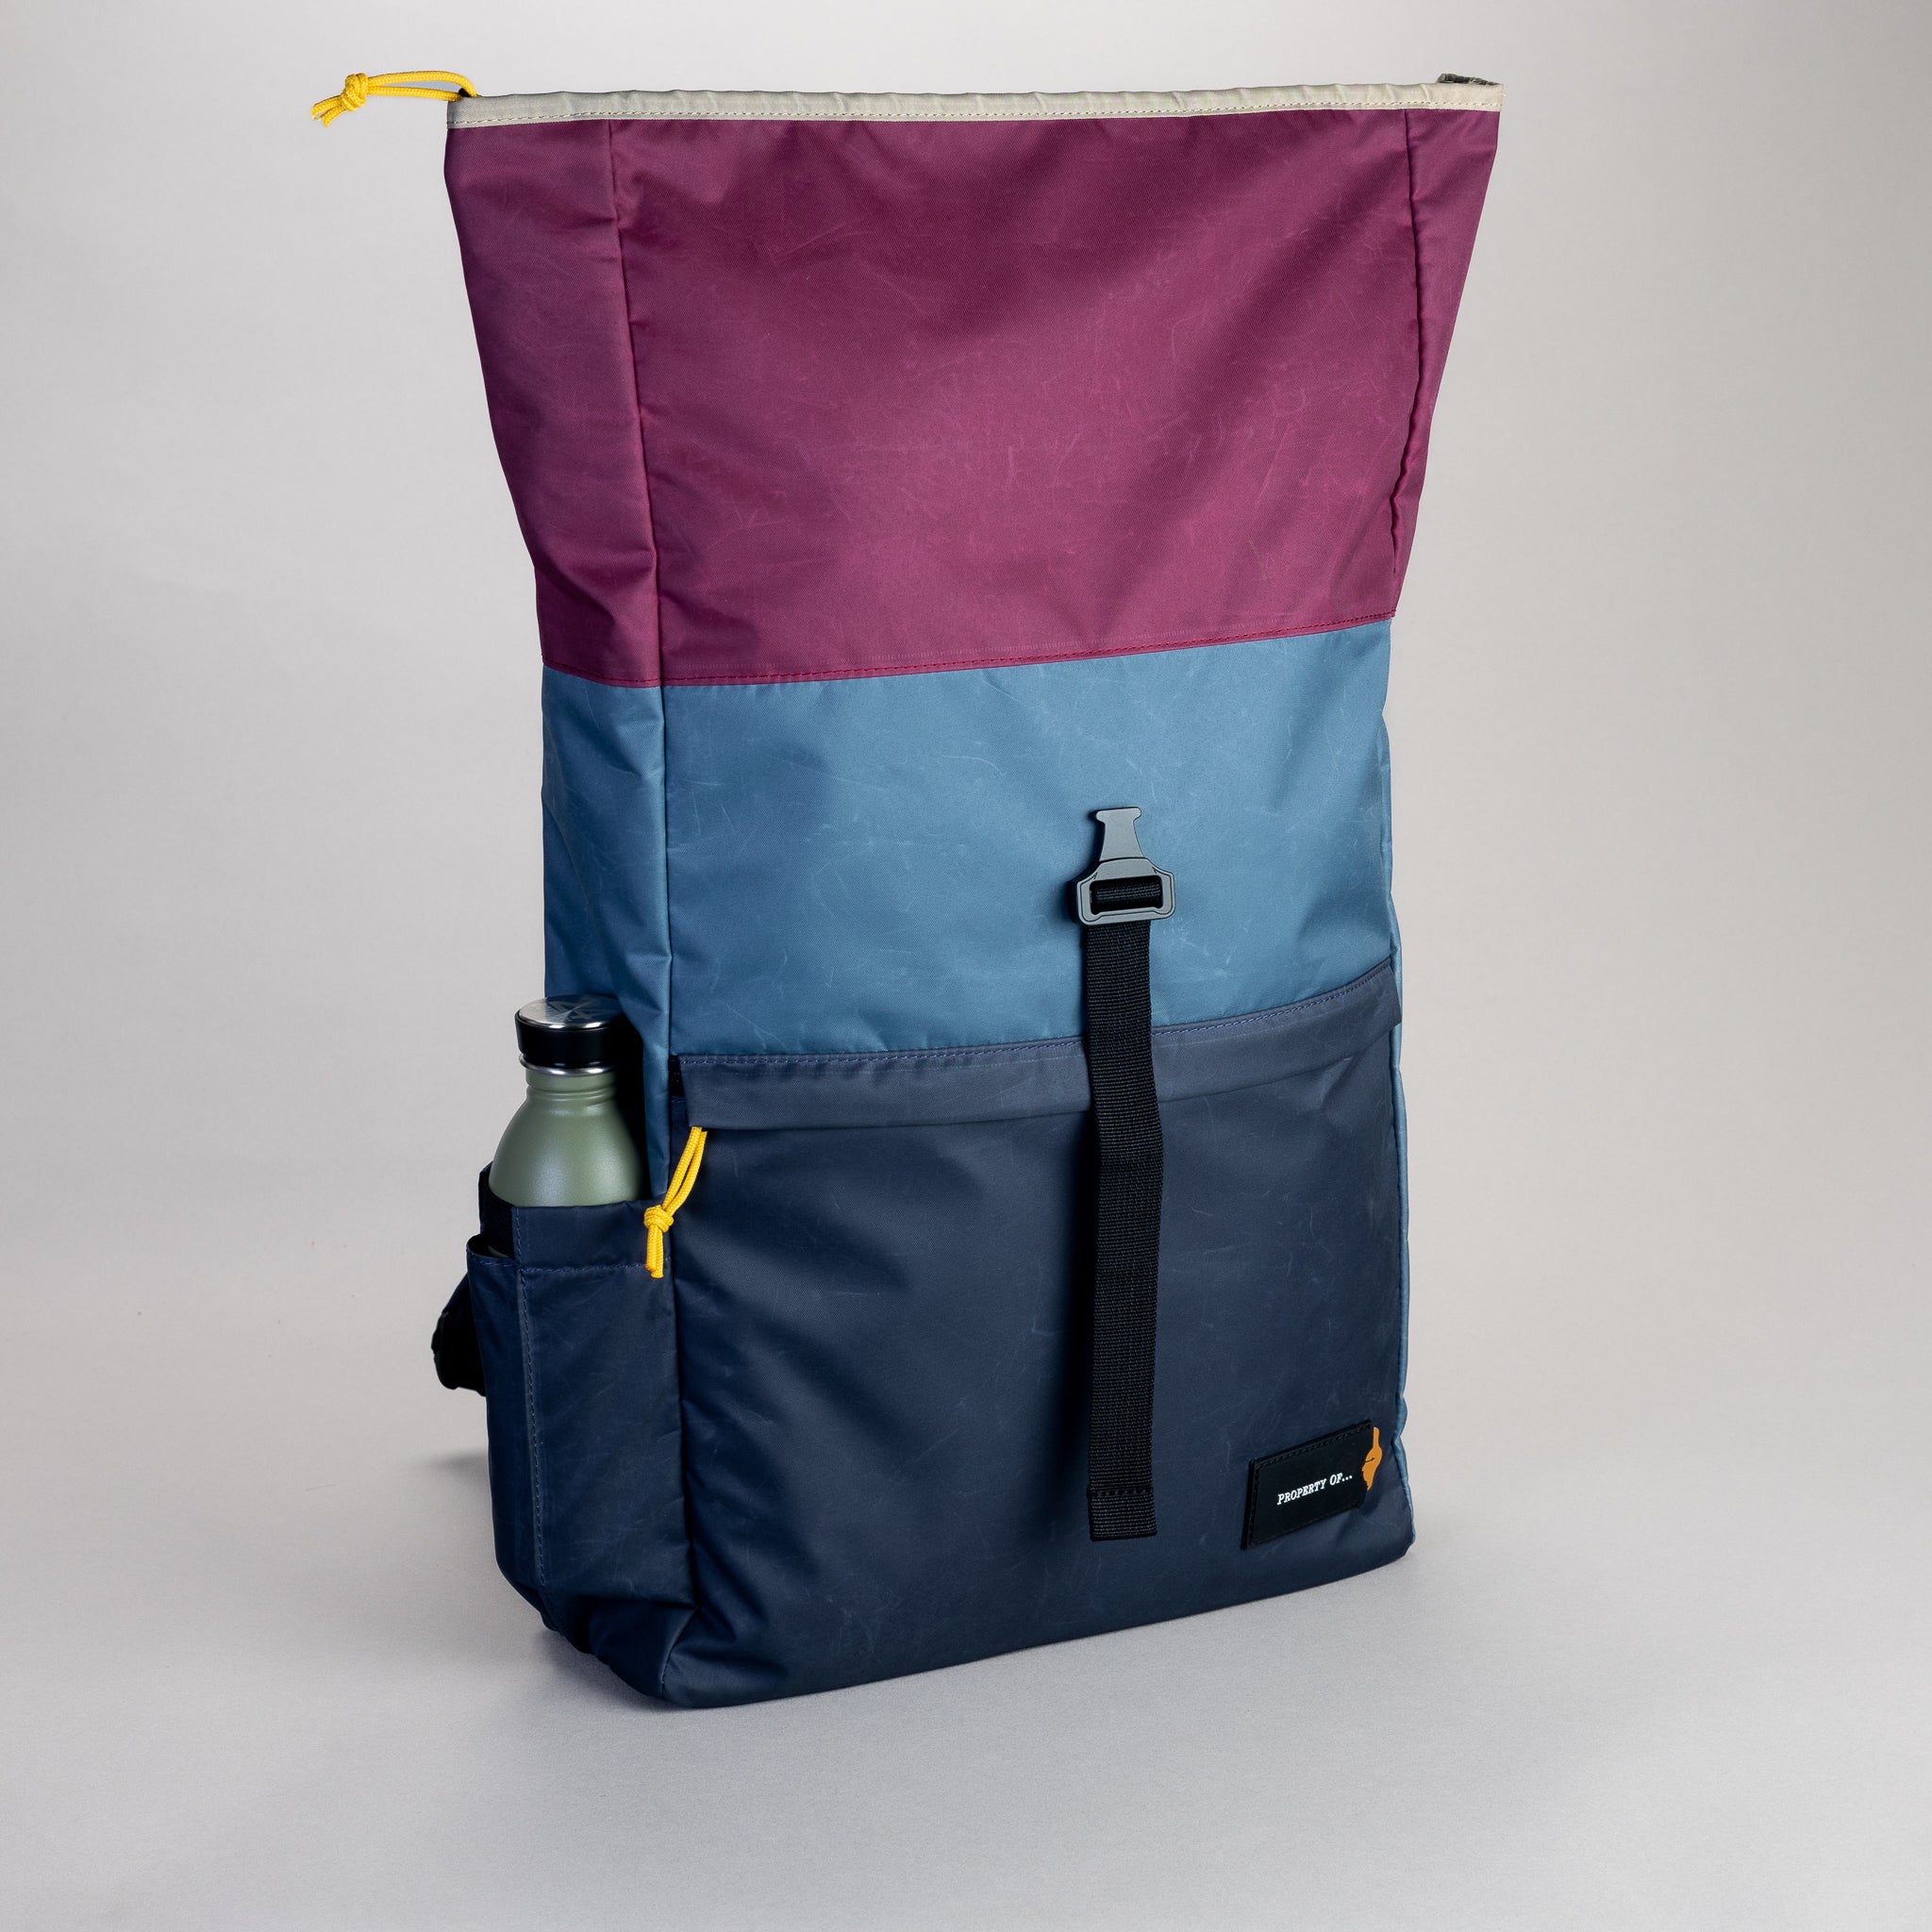 Lucas Roll-Down Backpack